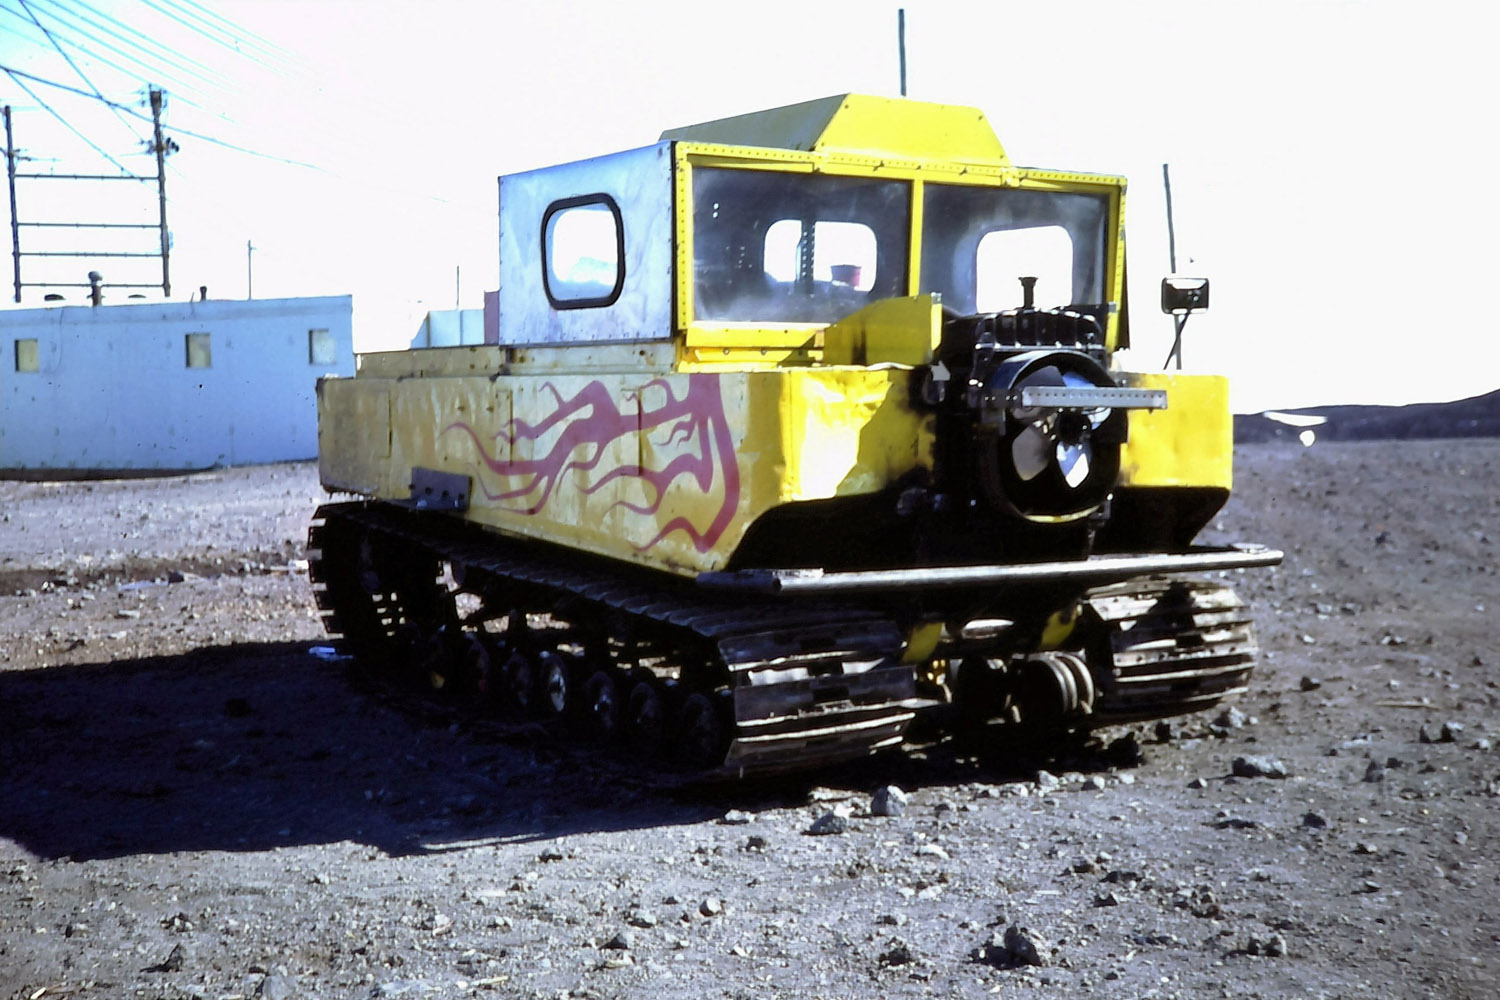 A 'Weasel' at McMurdo Station